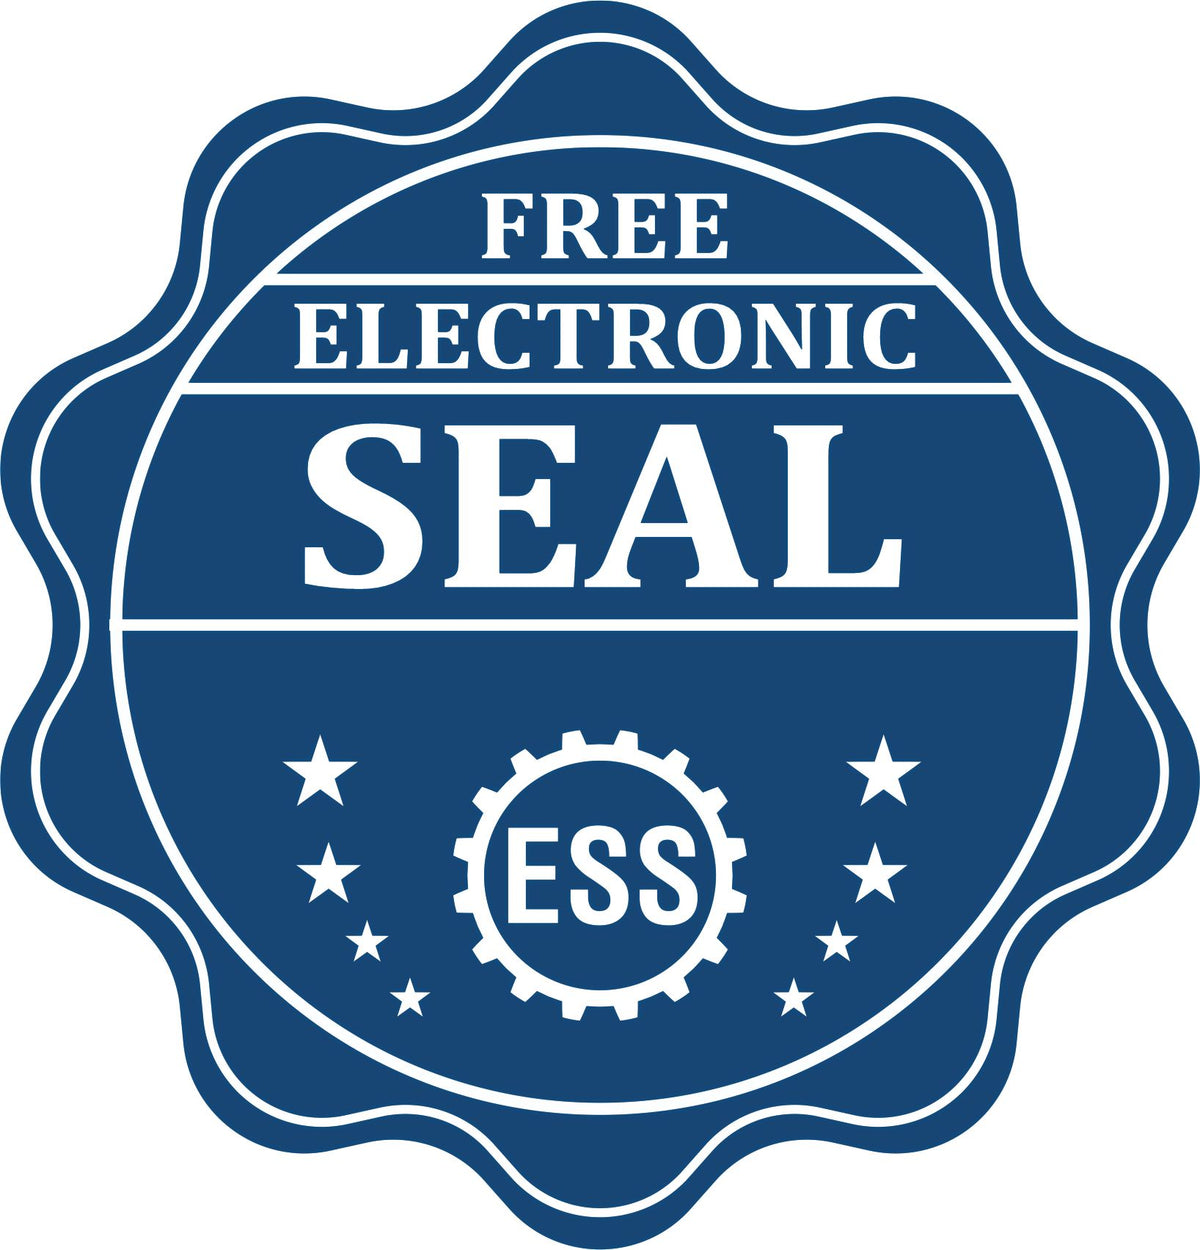 A badge showing a free electronic seal for the Long Reach District of Columbia PE Seal with stars and the ESS gear on the emblem.